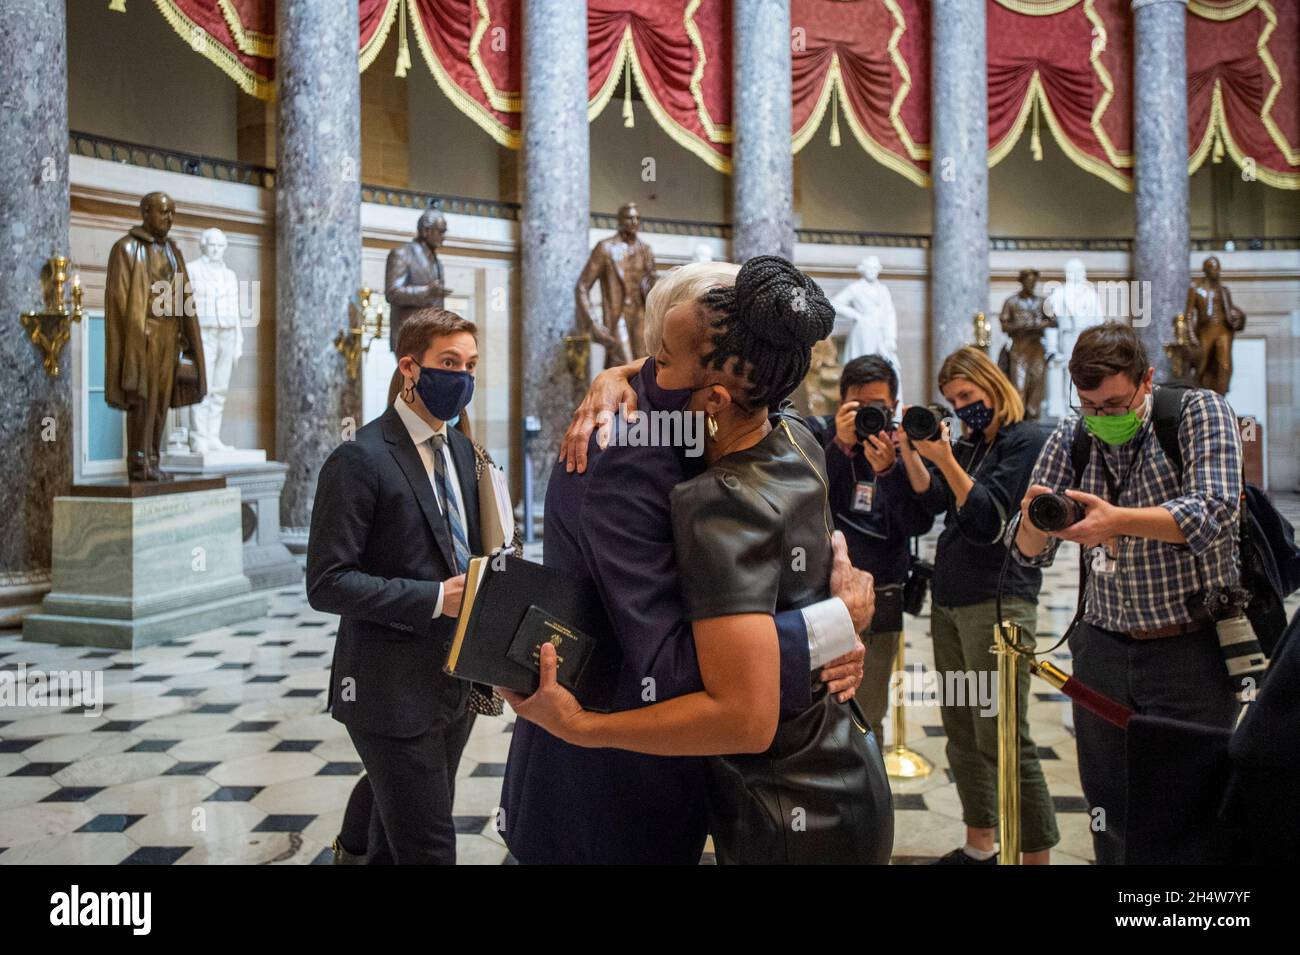 United States Representative Shontel Brown (Democrat of Ohio), right, is embraced by United States House Majority Leader Steny Hoyer (Democrat of Maryland), left, after being sworn-in as a member of the Congressional Black Caucus in Statuary Hall at the US Capitol in Washington, DC, Thursday, November 4, 2021. Credit: Rod Lamkey/CNP /MediaPunch Stock Photo